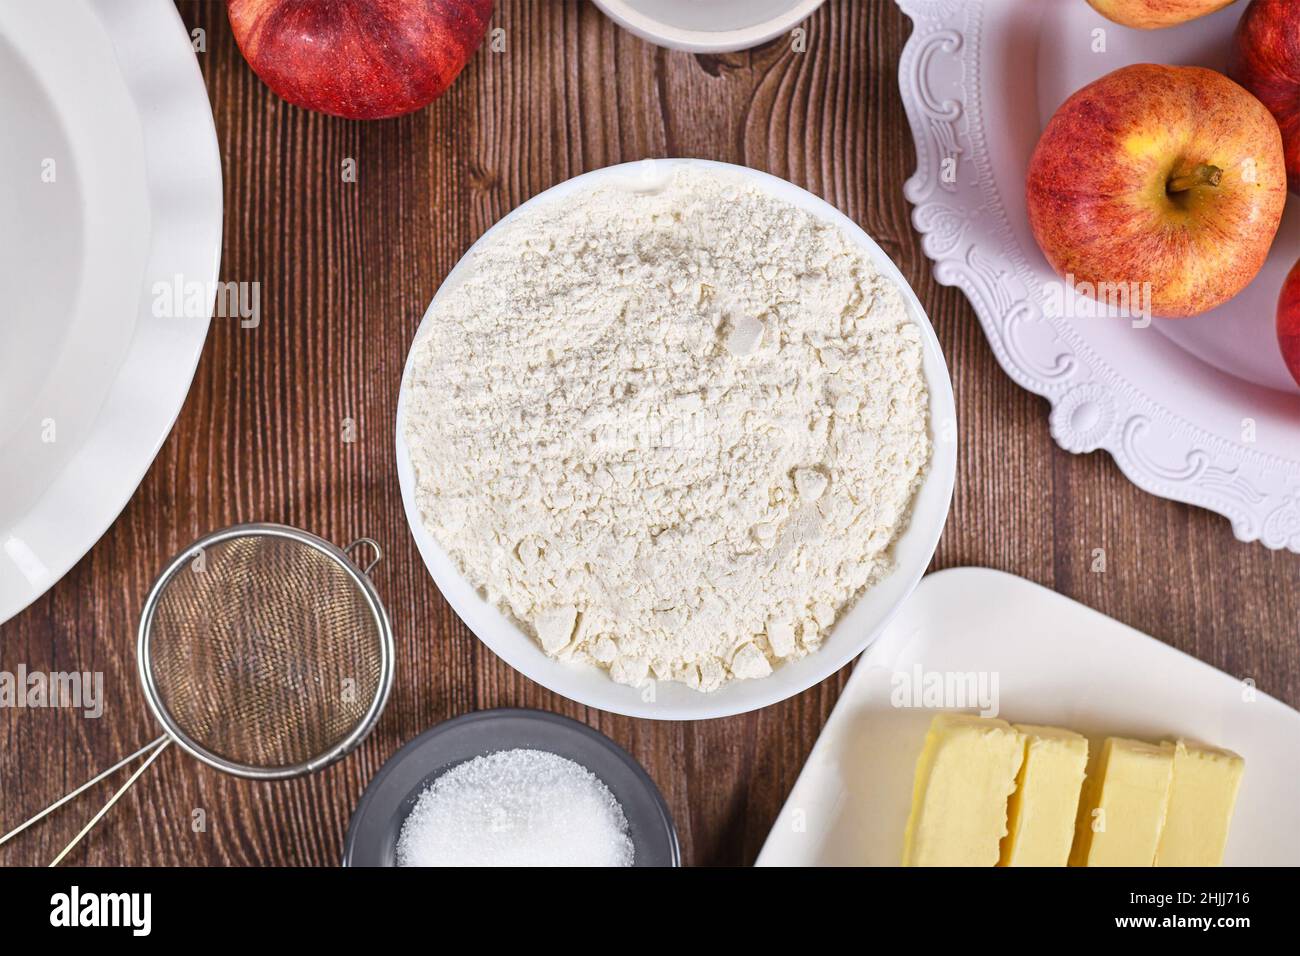 Bowl of flour surrounded by other pie crust ingredients like butter and sugar on wooden background Stock Photo